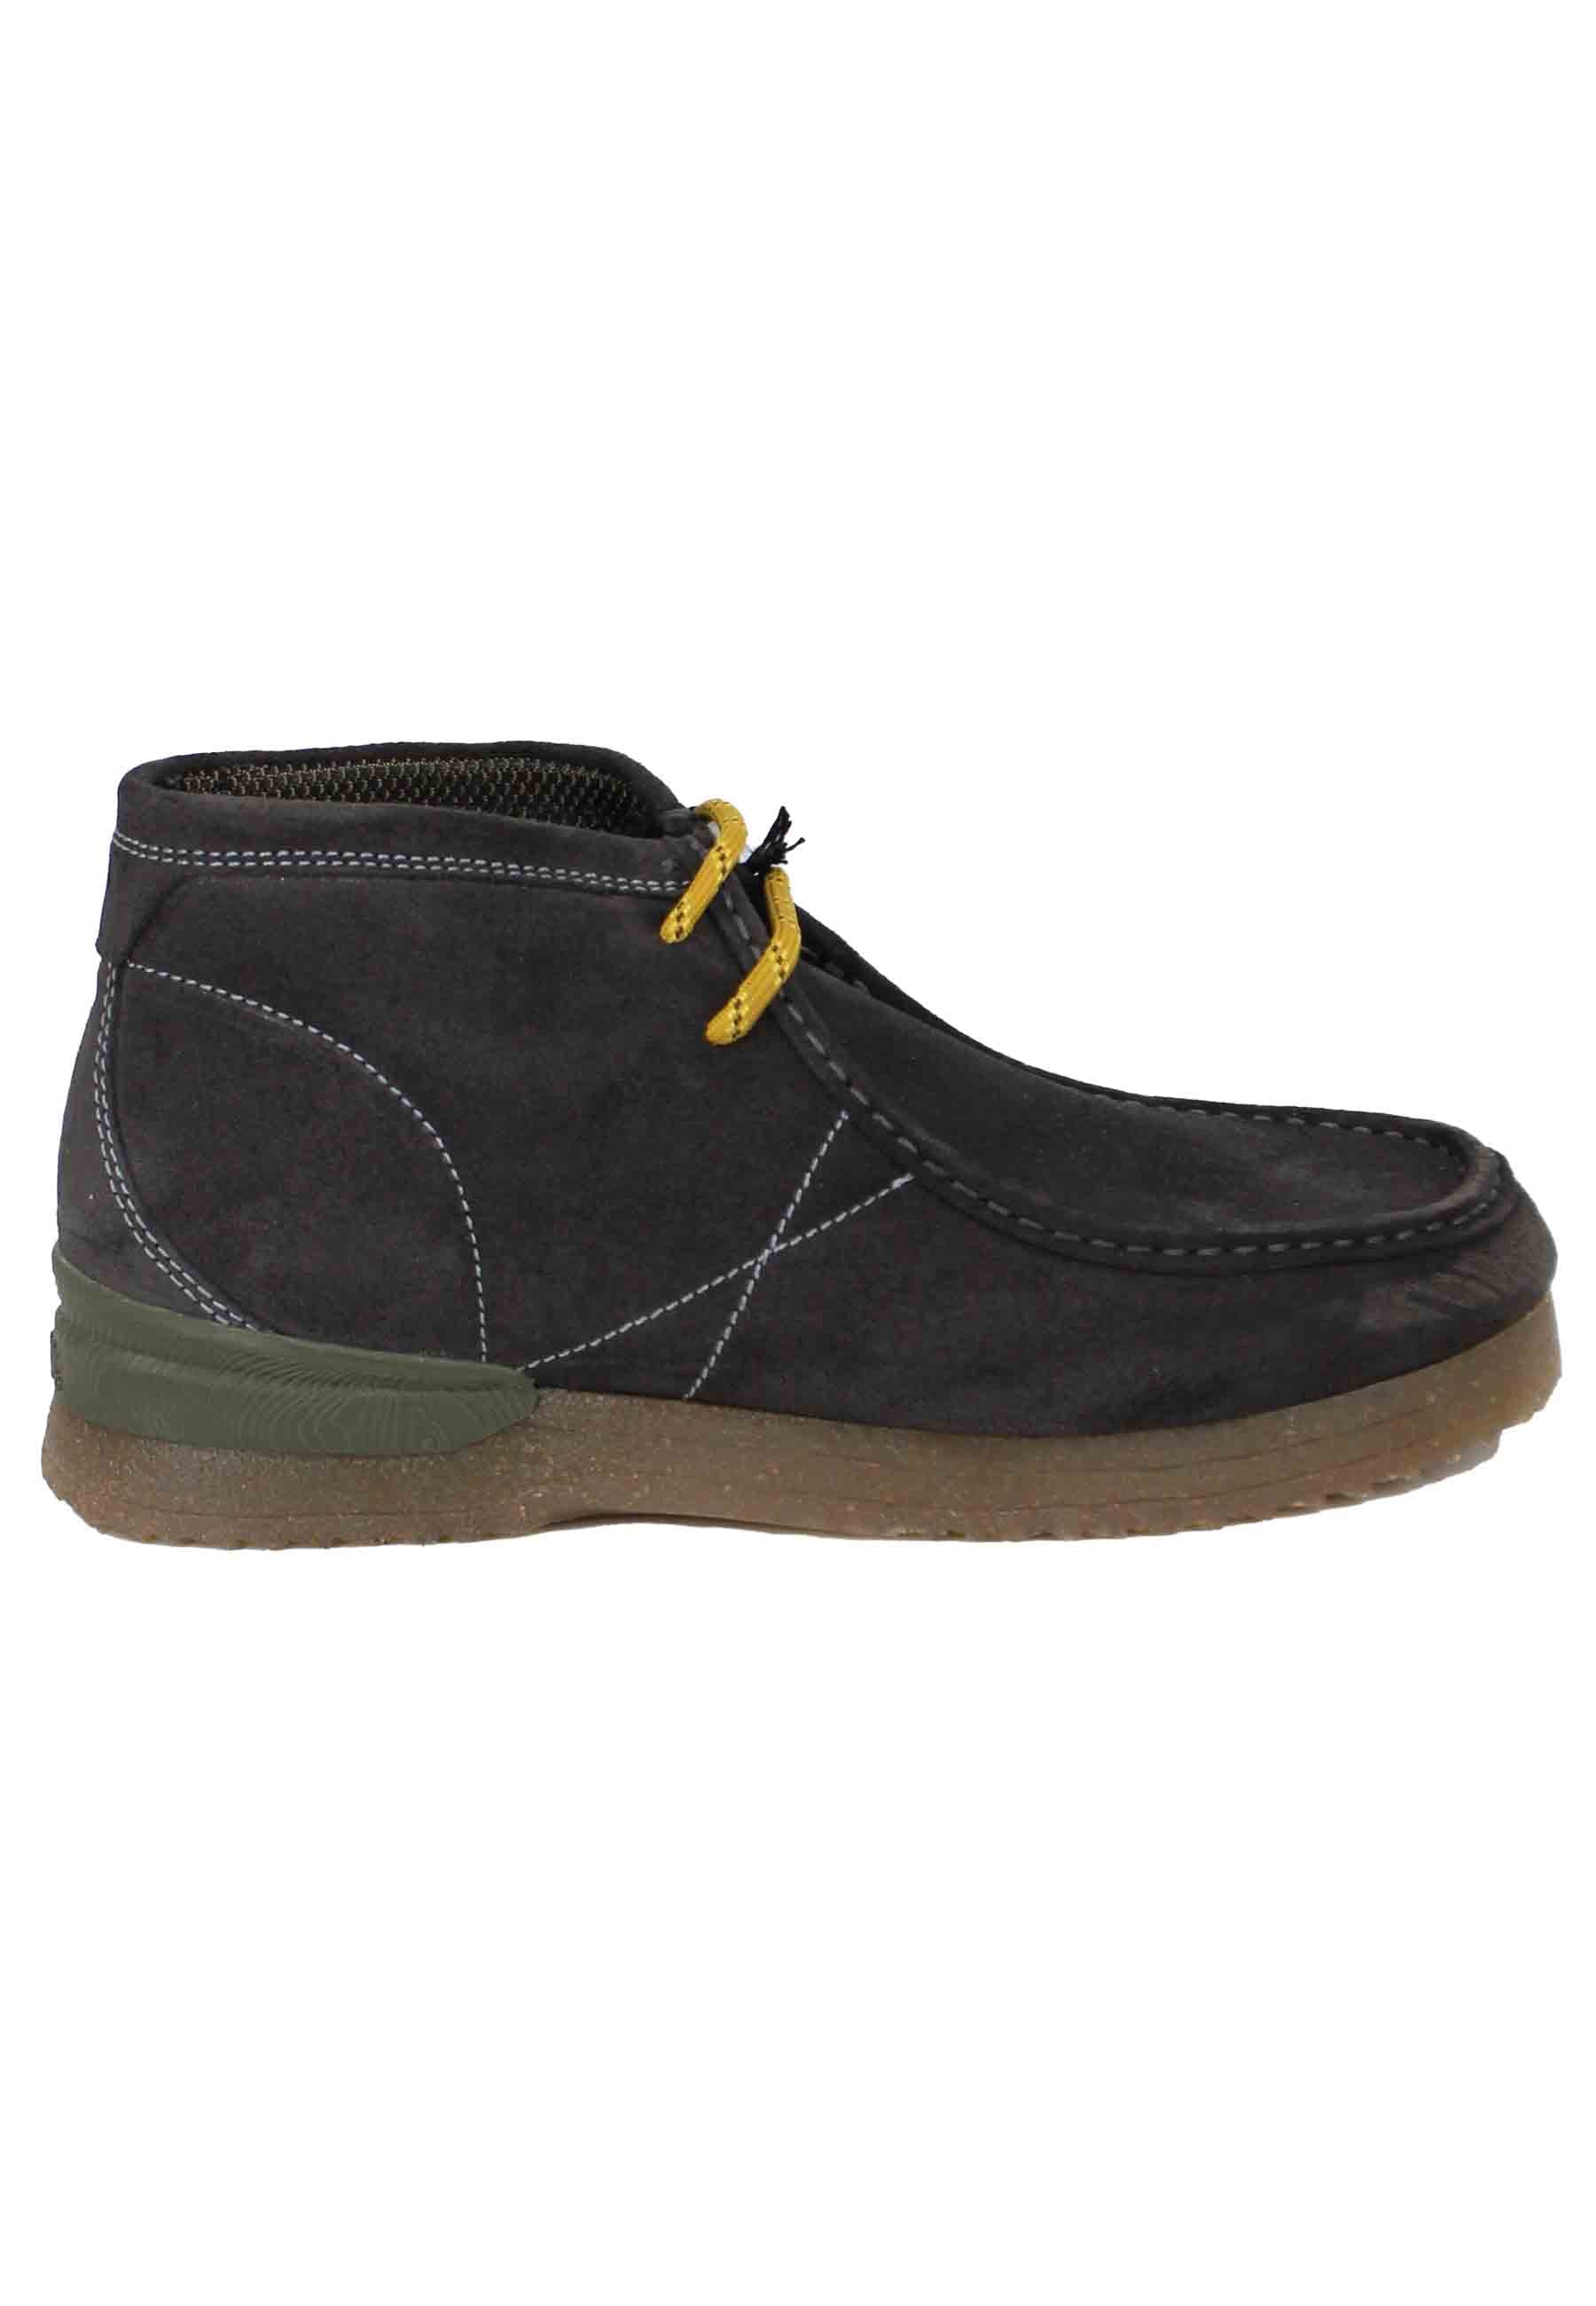 Men's ankle boots in gray suede with Bantam crepe sole